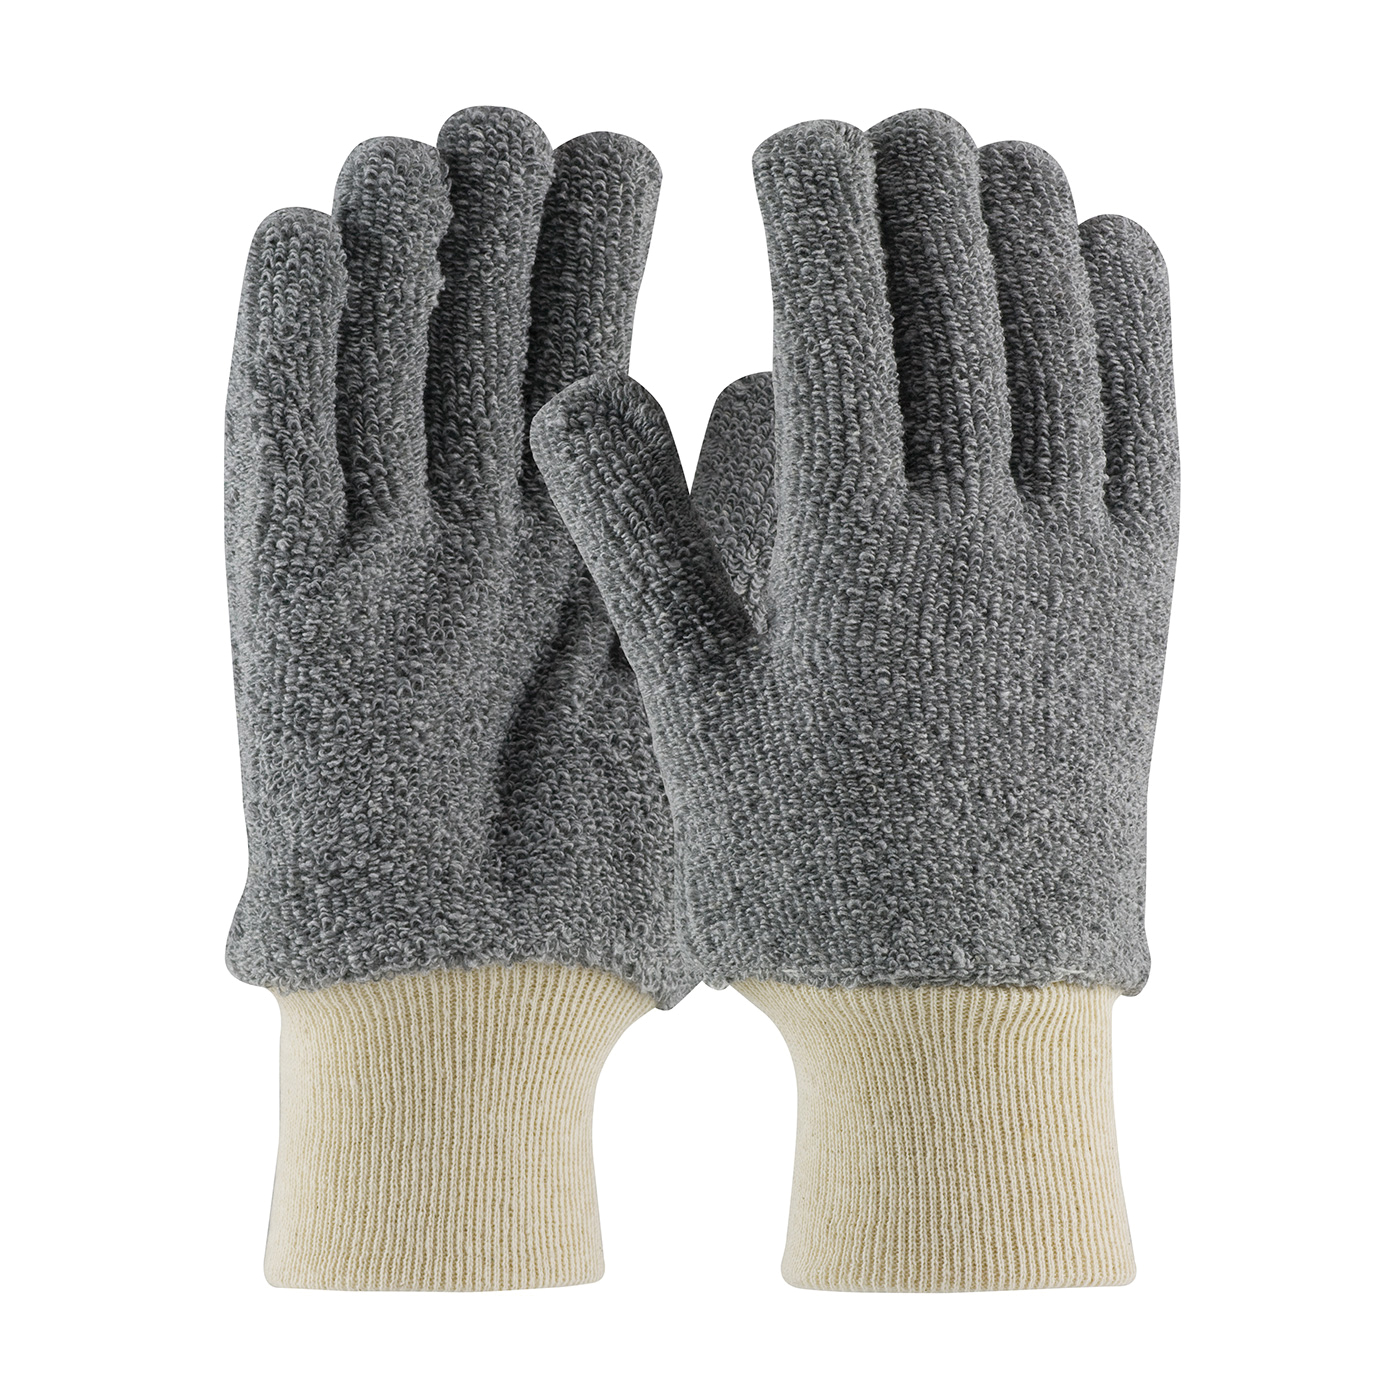 PIP® 42-C753/S 42-C753 General Purpose Gloves, Ambidextrous/Loop-Out Style, S, Terrycloth Palm, Cotton/Terrycloth, Gray, Knit Wrist Cuff, Uncoated Coating, Resists: Abrasion, Cut and Heat, Terry Cloth Lining